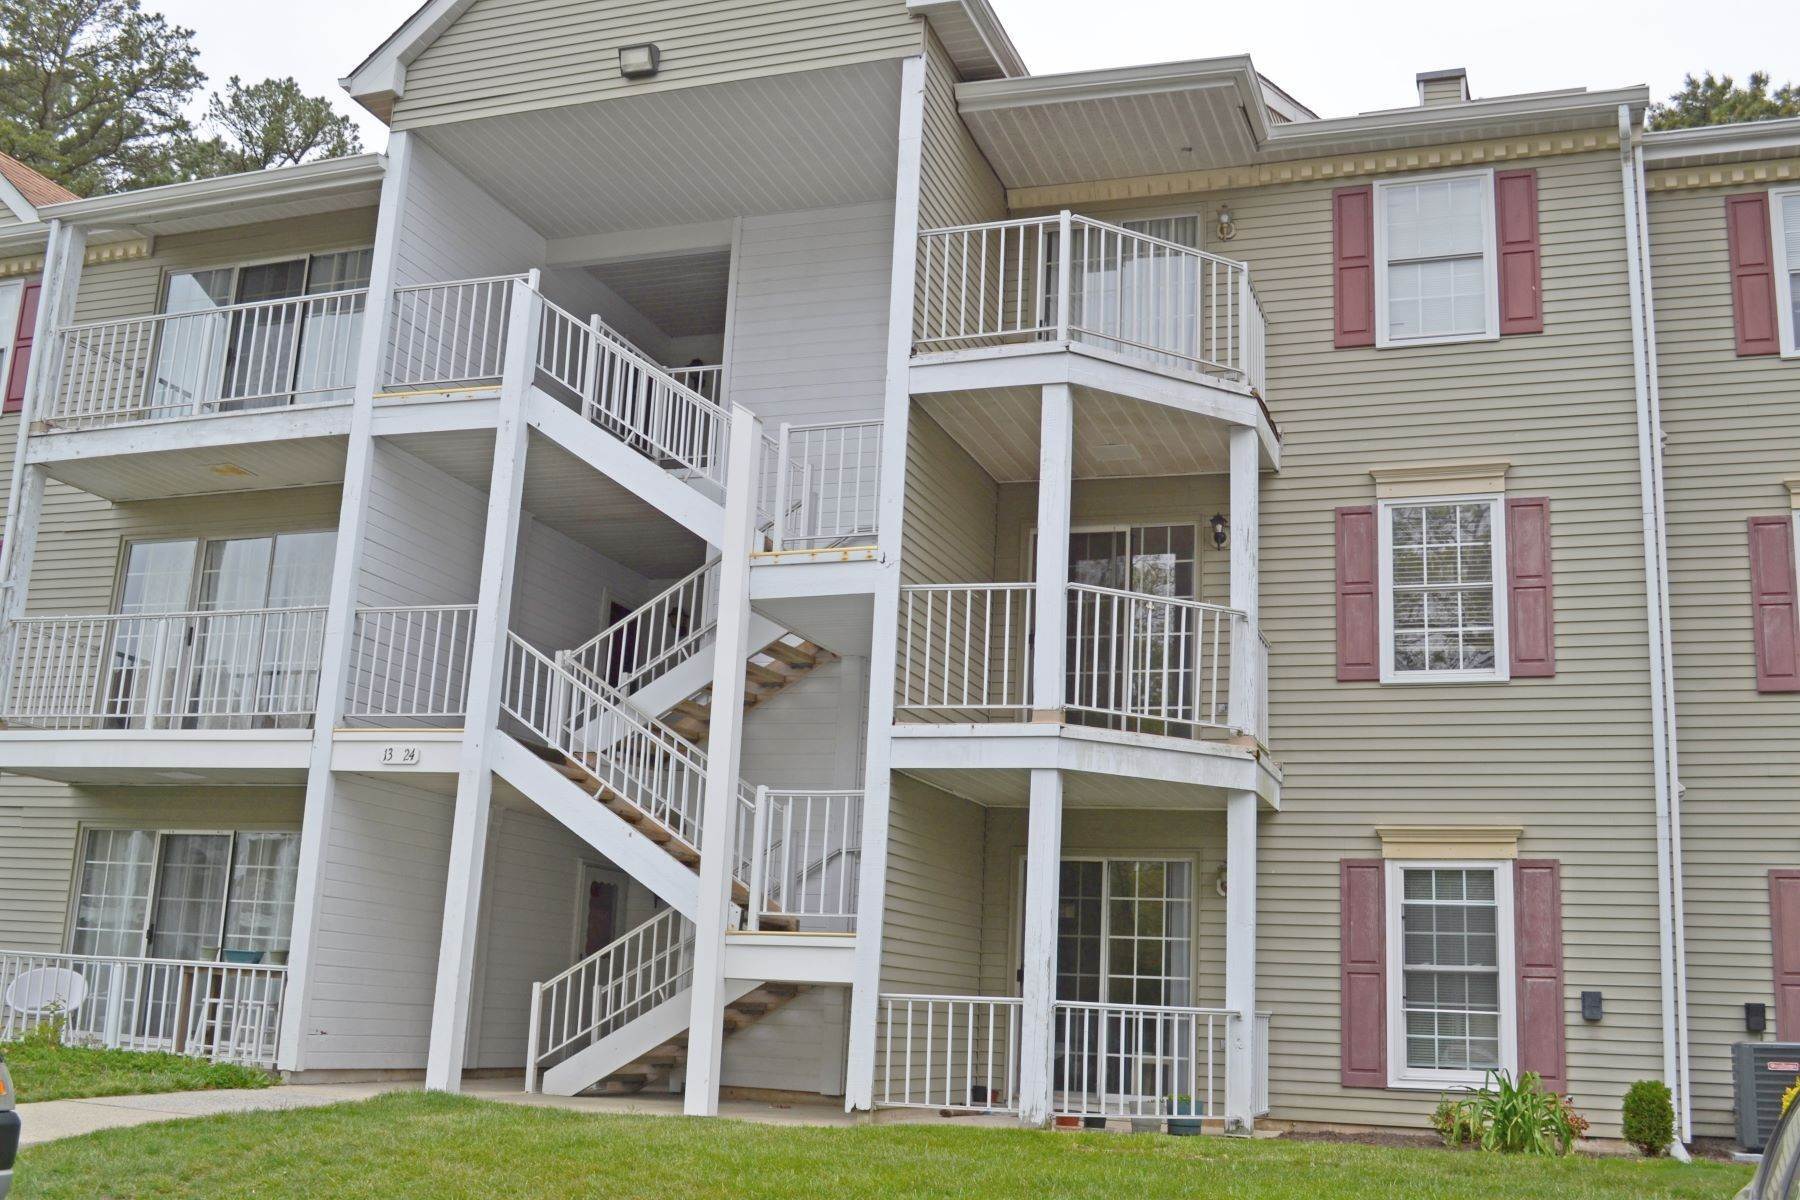 2. Condominiums for Sale at Society Hill 2 14 Iroquois Dr Galloway, New Jersey 08205 United States